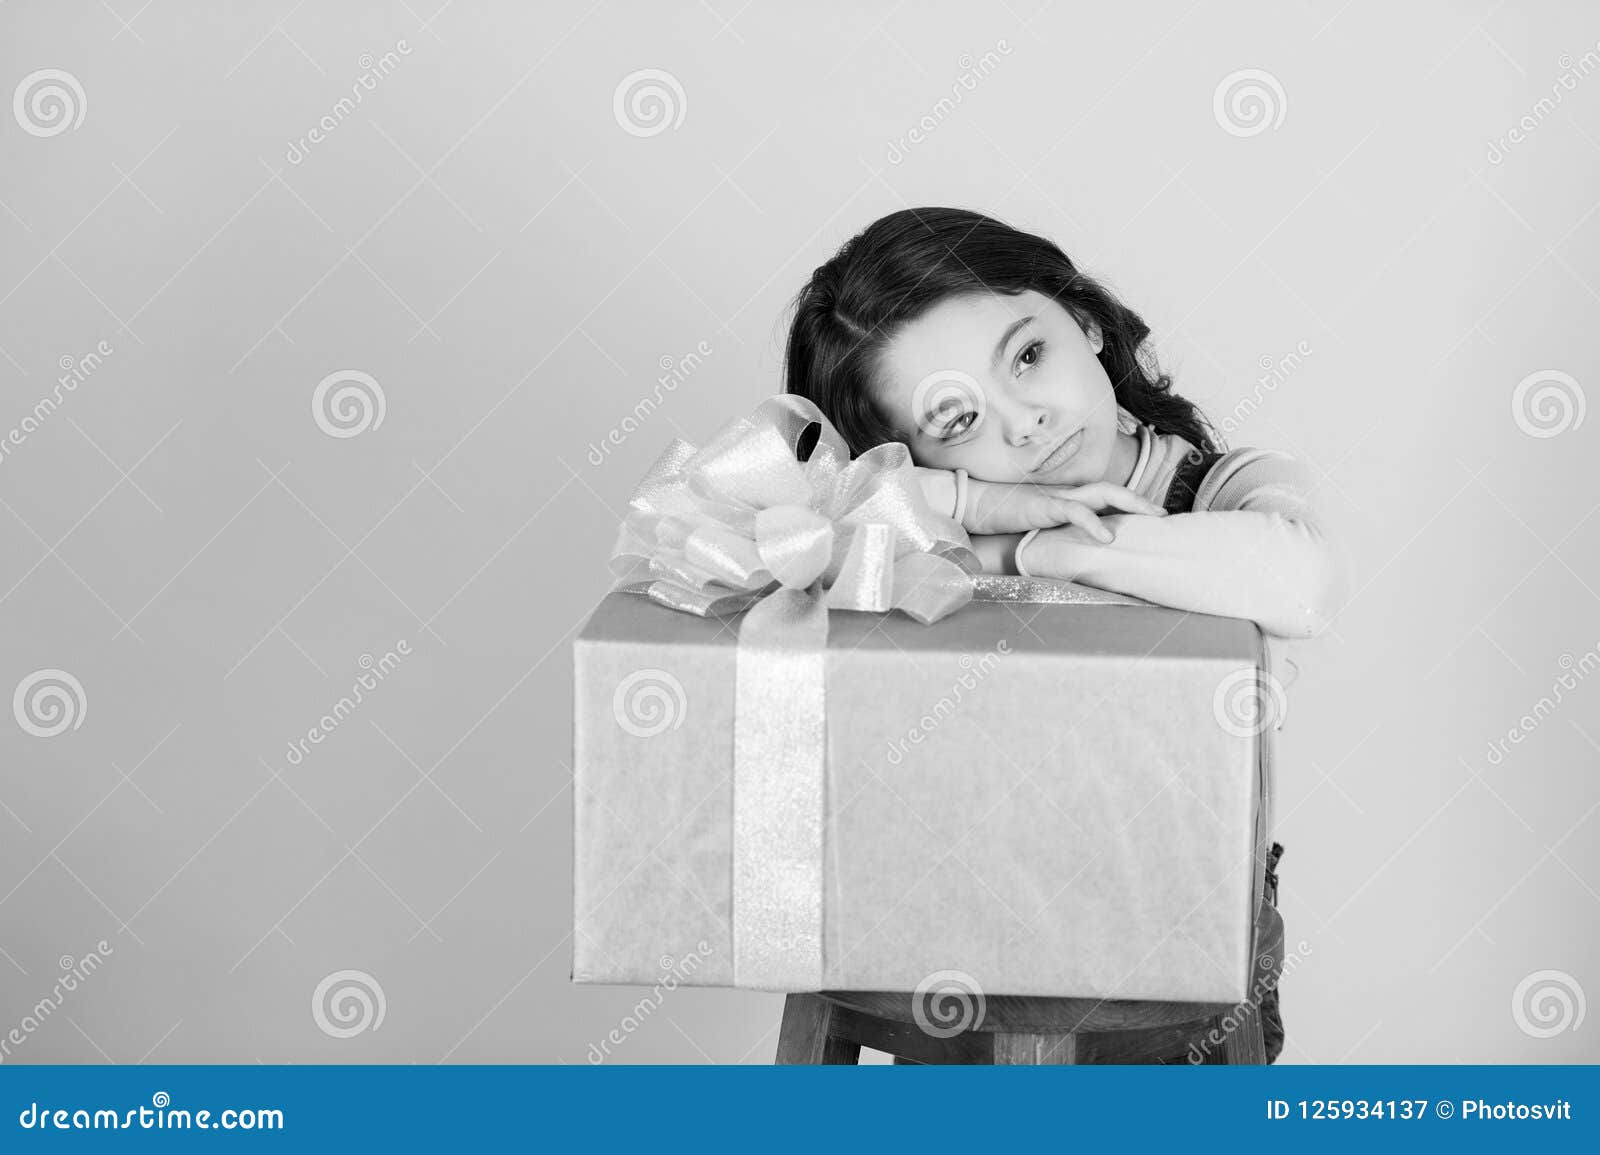 Box with Ribbon Bow and Little Girl Stock Image - Image of fashionable ...